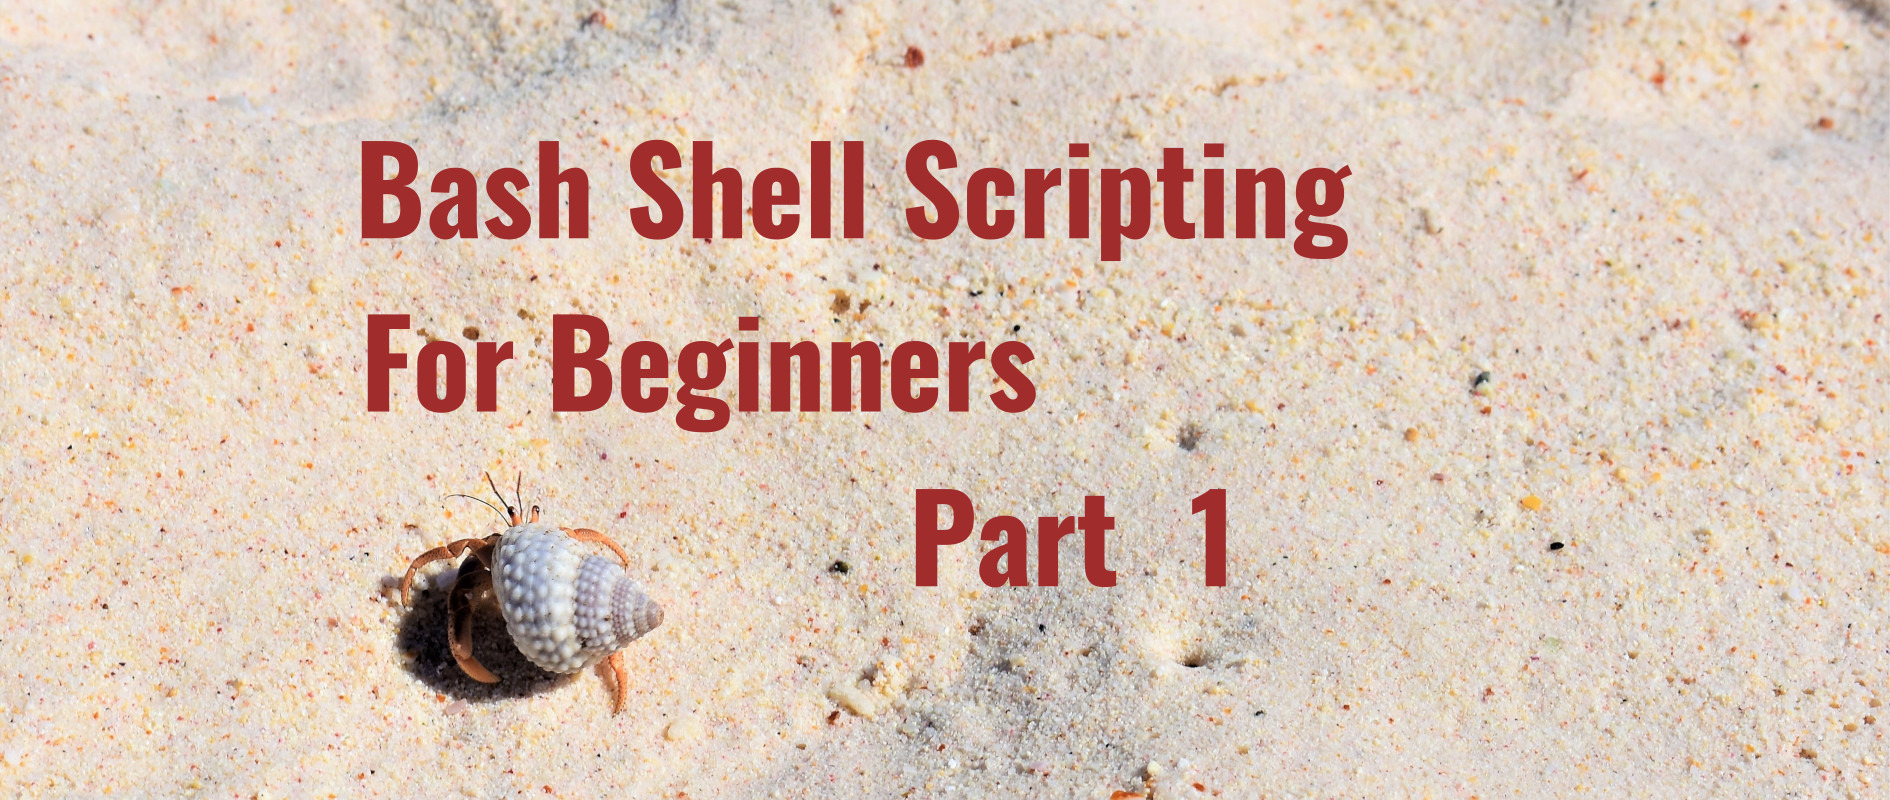 As the title implies this article will be covering Bash Shell Scripting at a beginner level. I’m not going to review the history of Bash but the